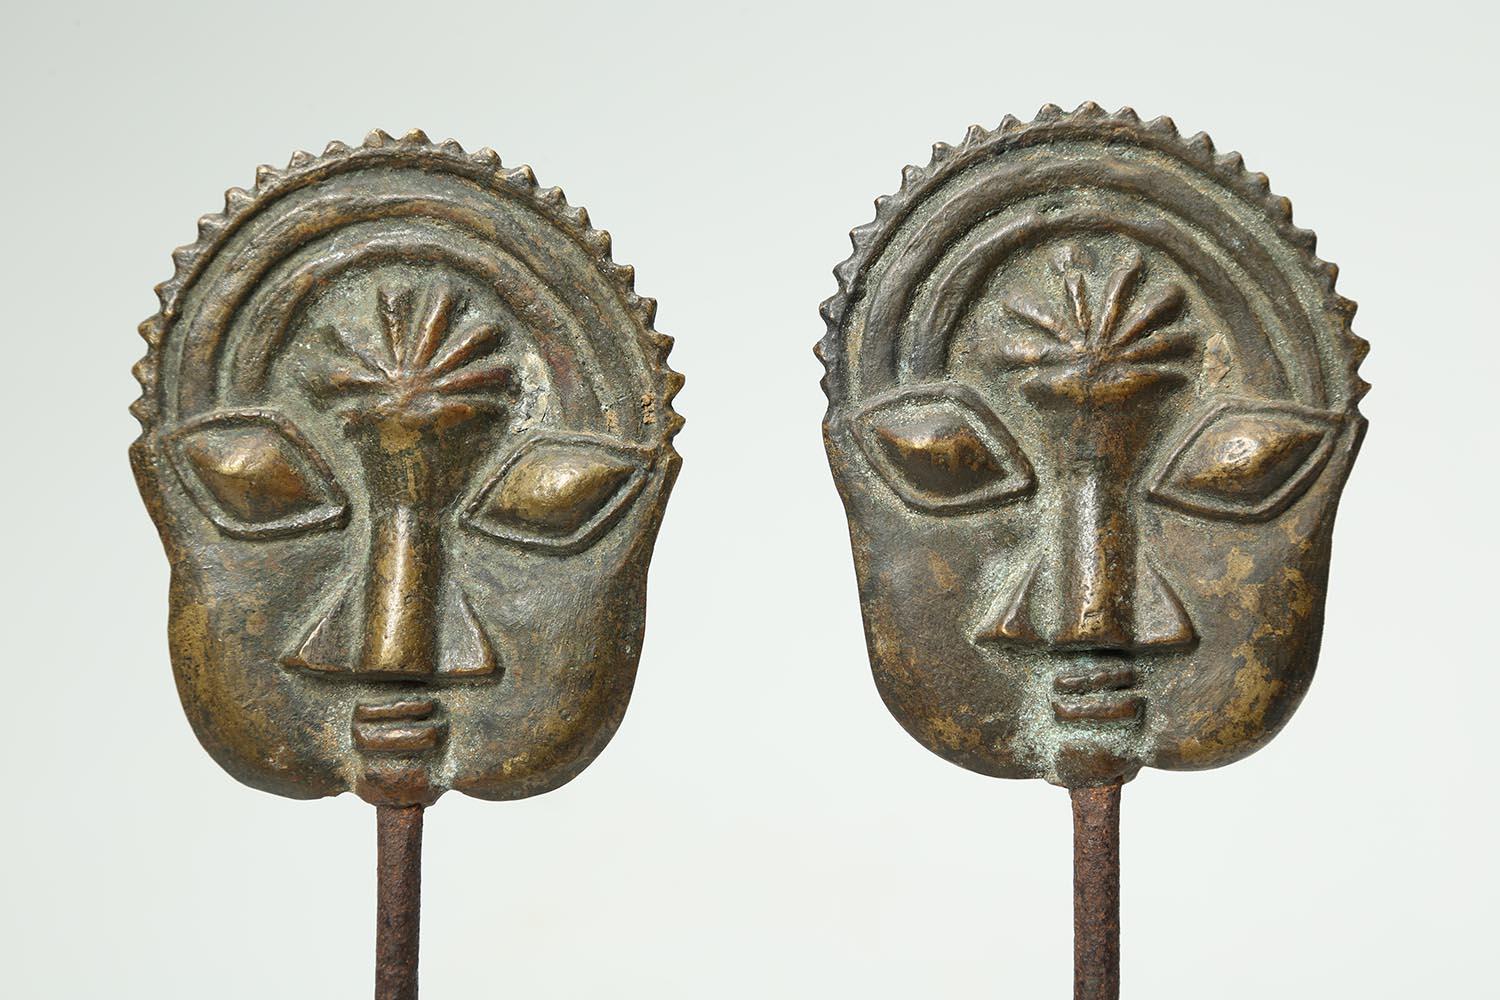 Yoruba People, Ogboni men's secret society pair of brass pins with expressive faces, Nigeria, early 20th century. A pair of cast brass or bronze Ogboni society pins with matched flat faces on iron pins, mounted on custom base. Each of the faces 3